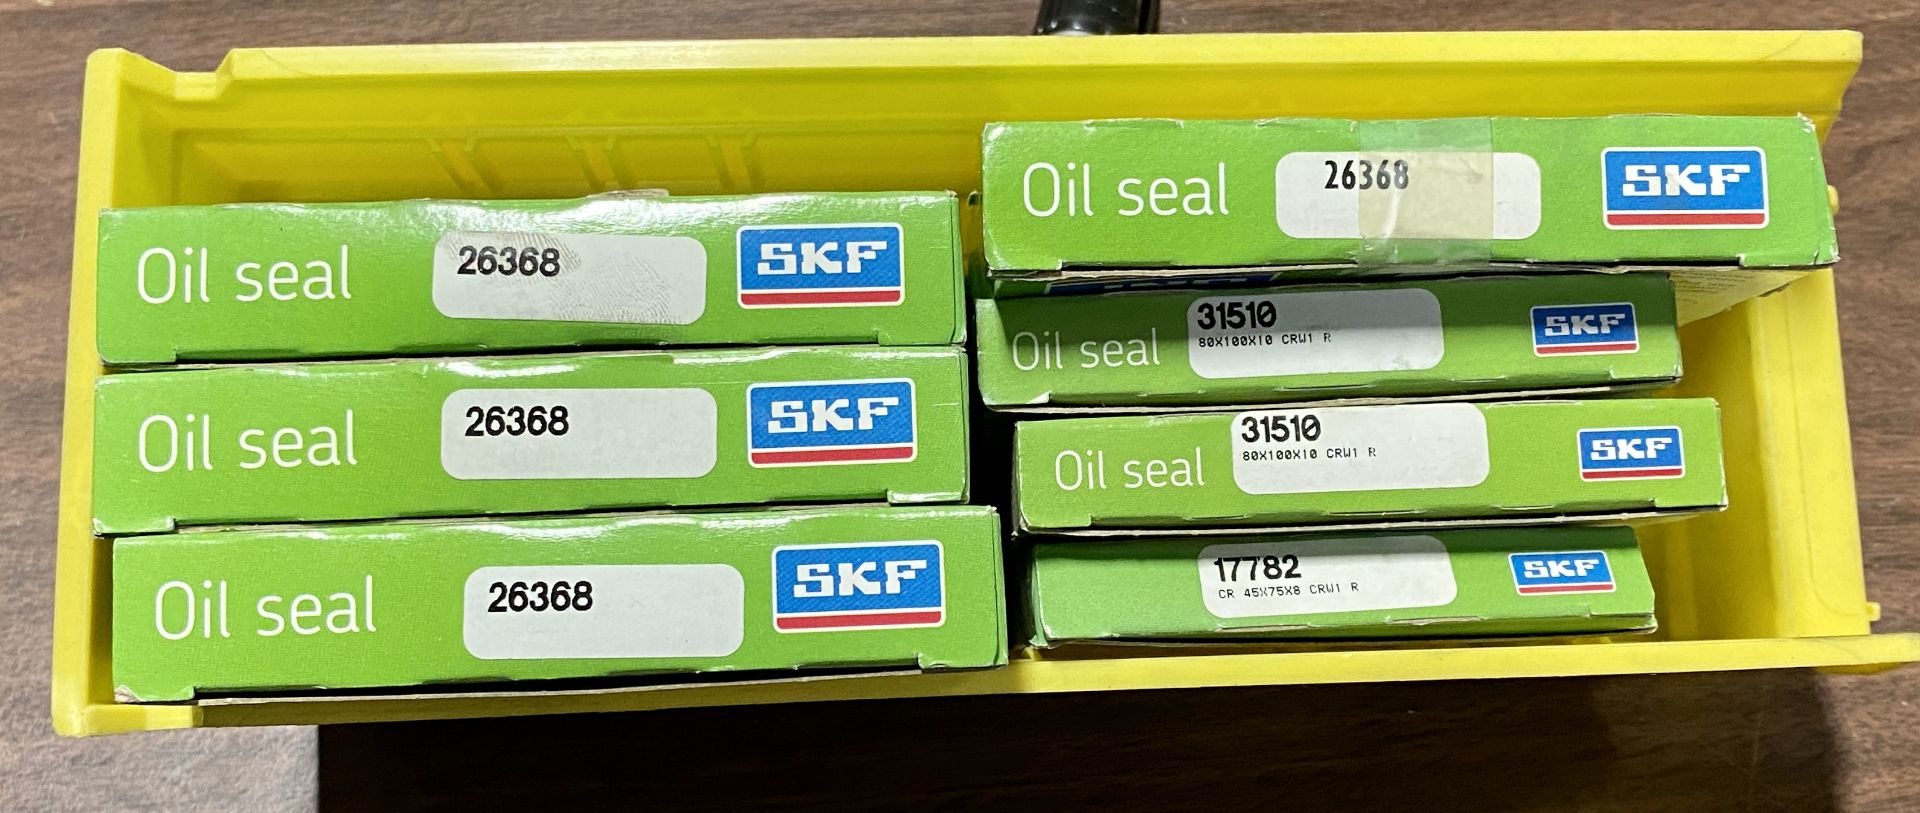 Lot of SKF Oil Seals - Image 9 of 10